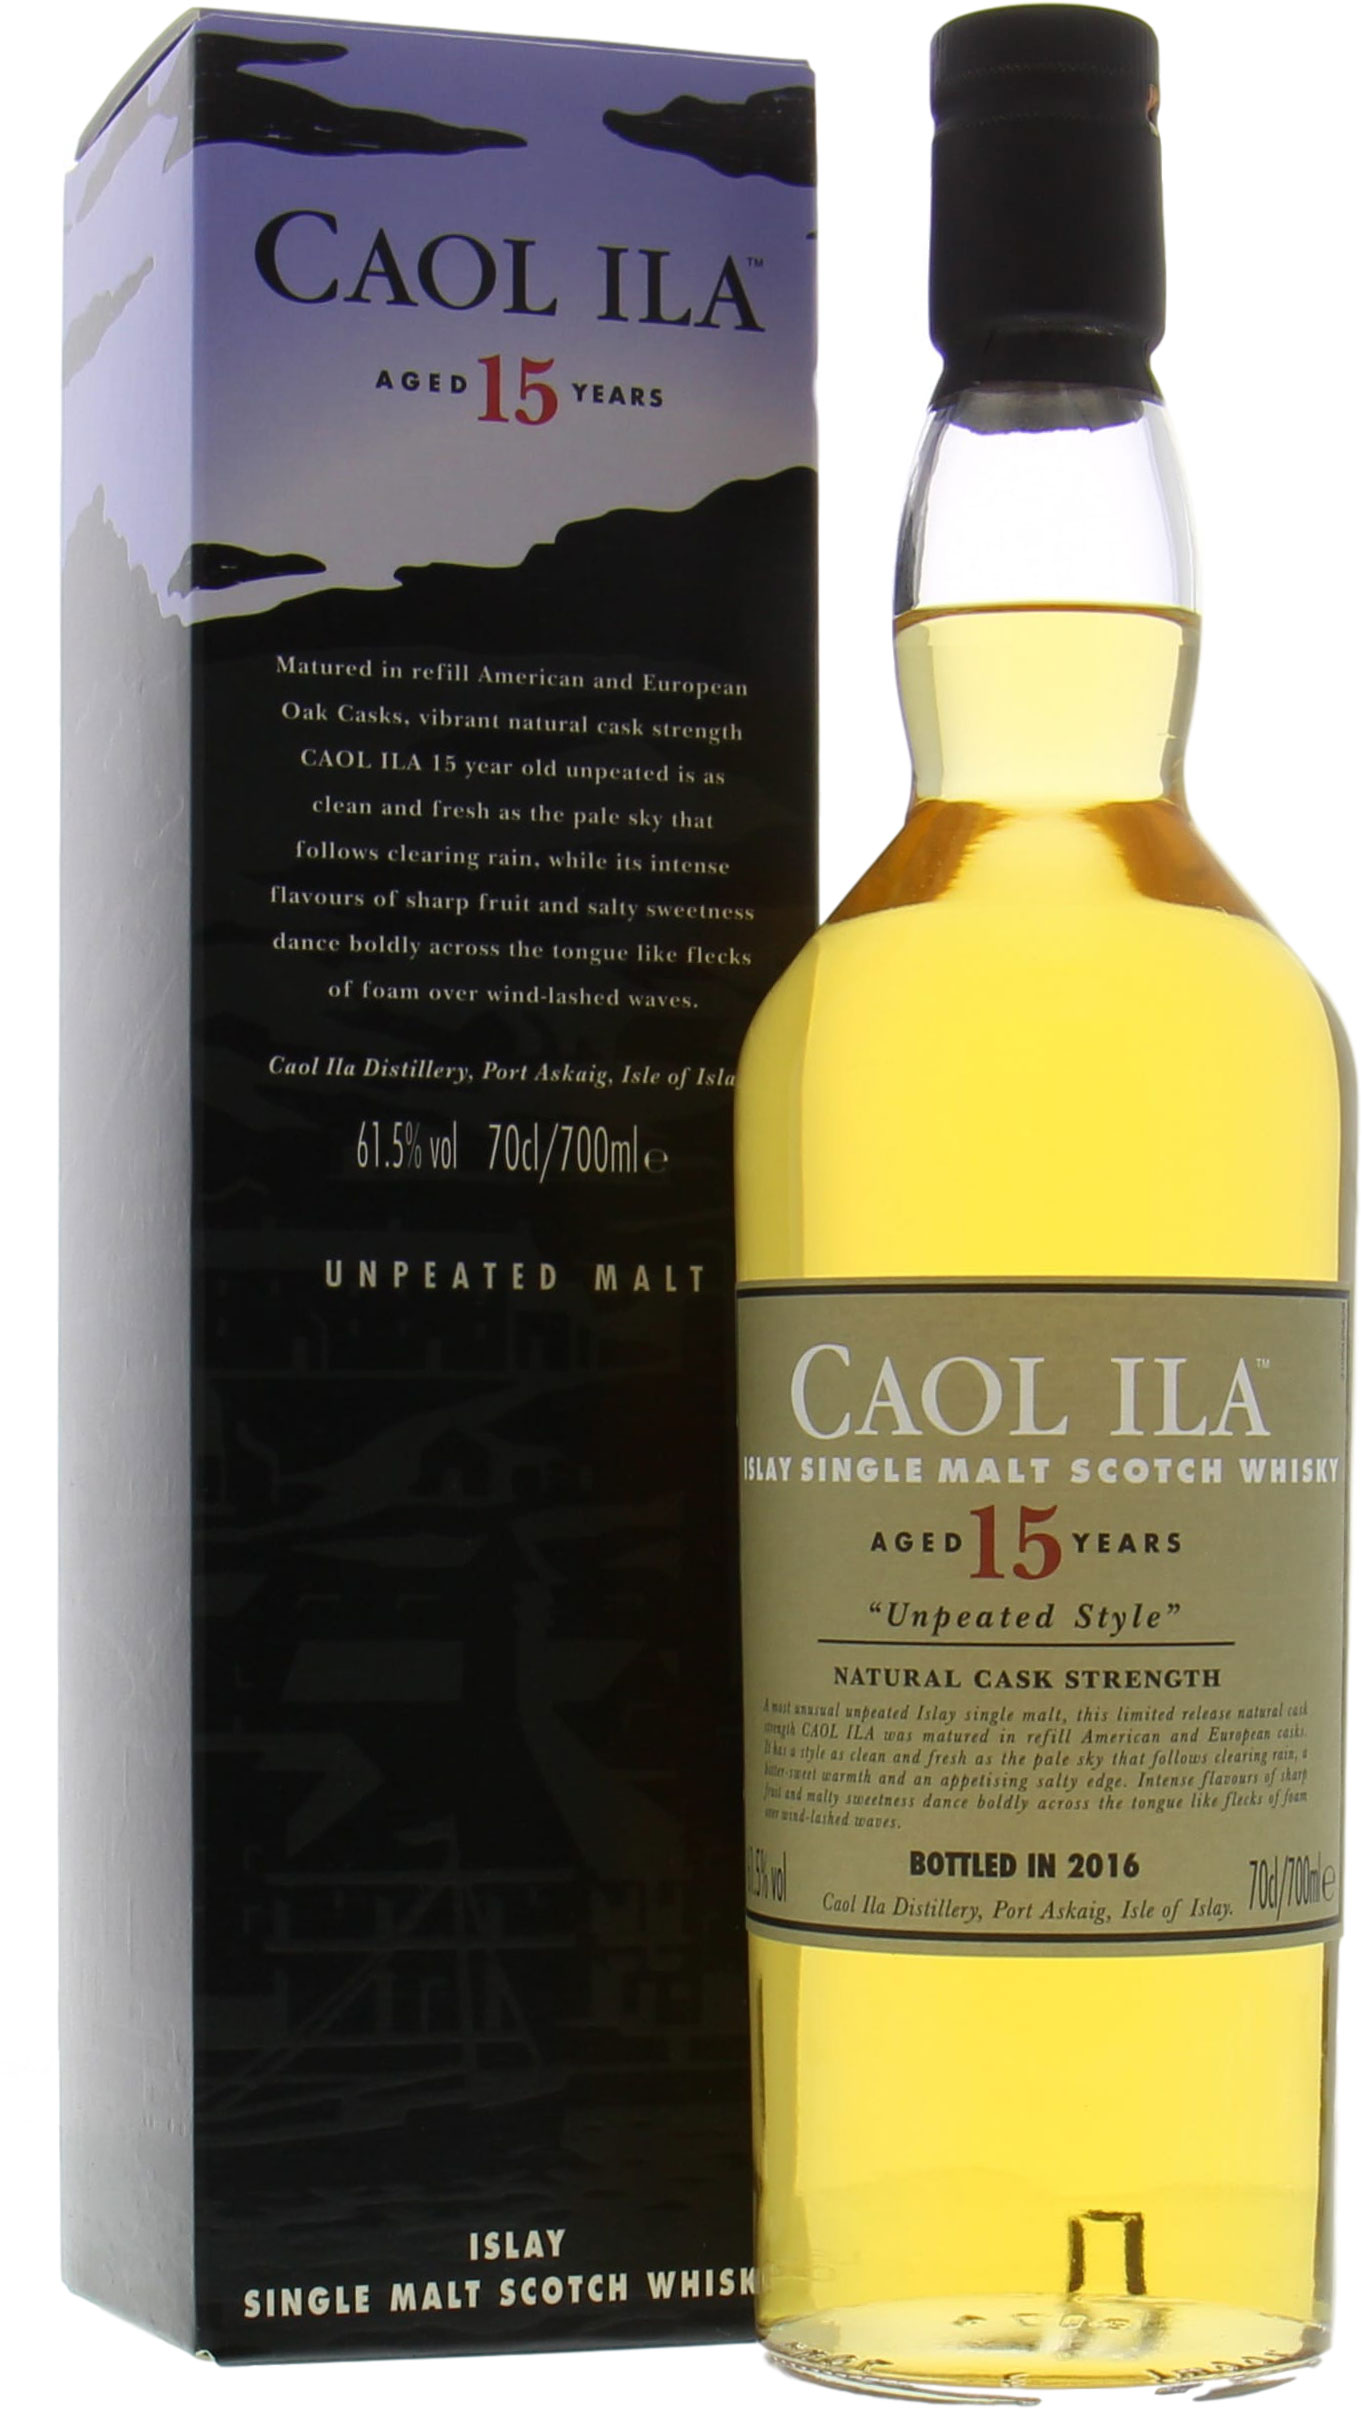 Caol Ila - 15 Years Old Unpeated Style Special Release 2016 61.5% nv In Original Container